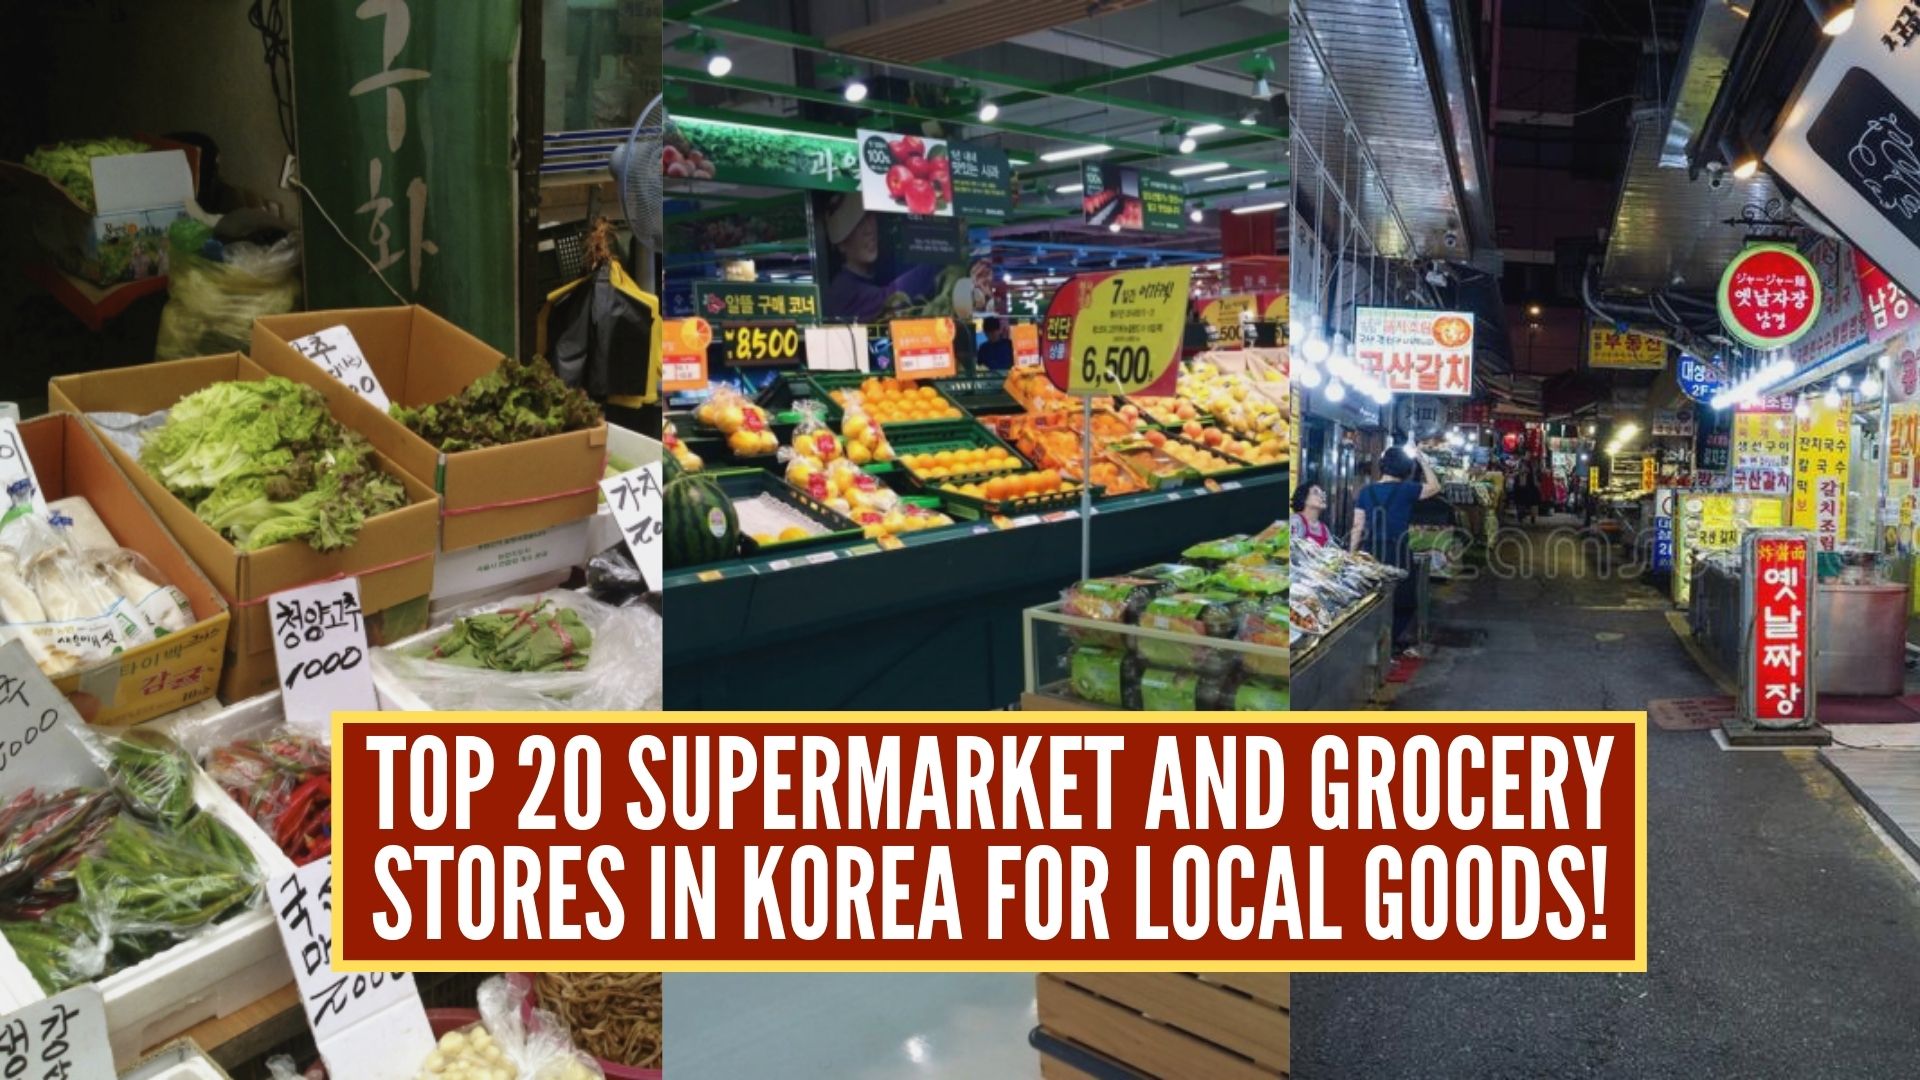 GROCERY STORES IN KOREA